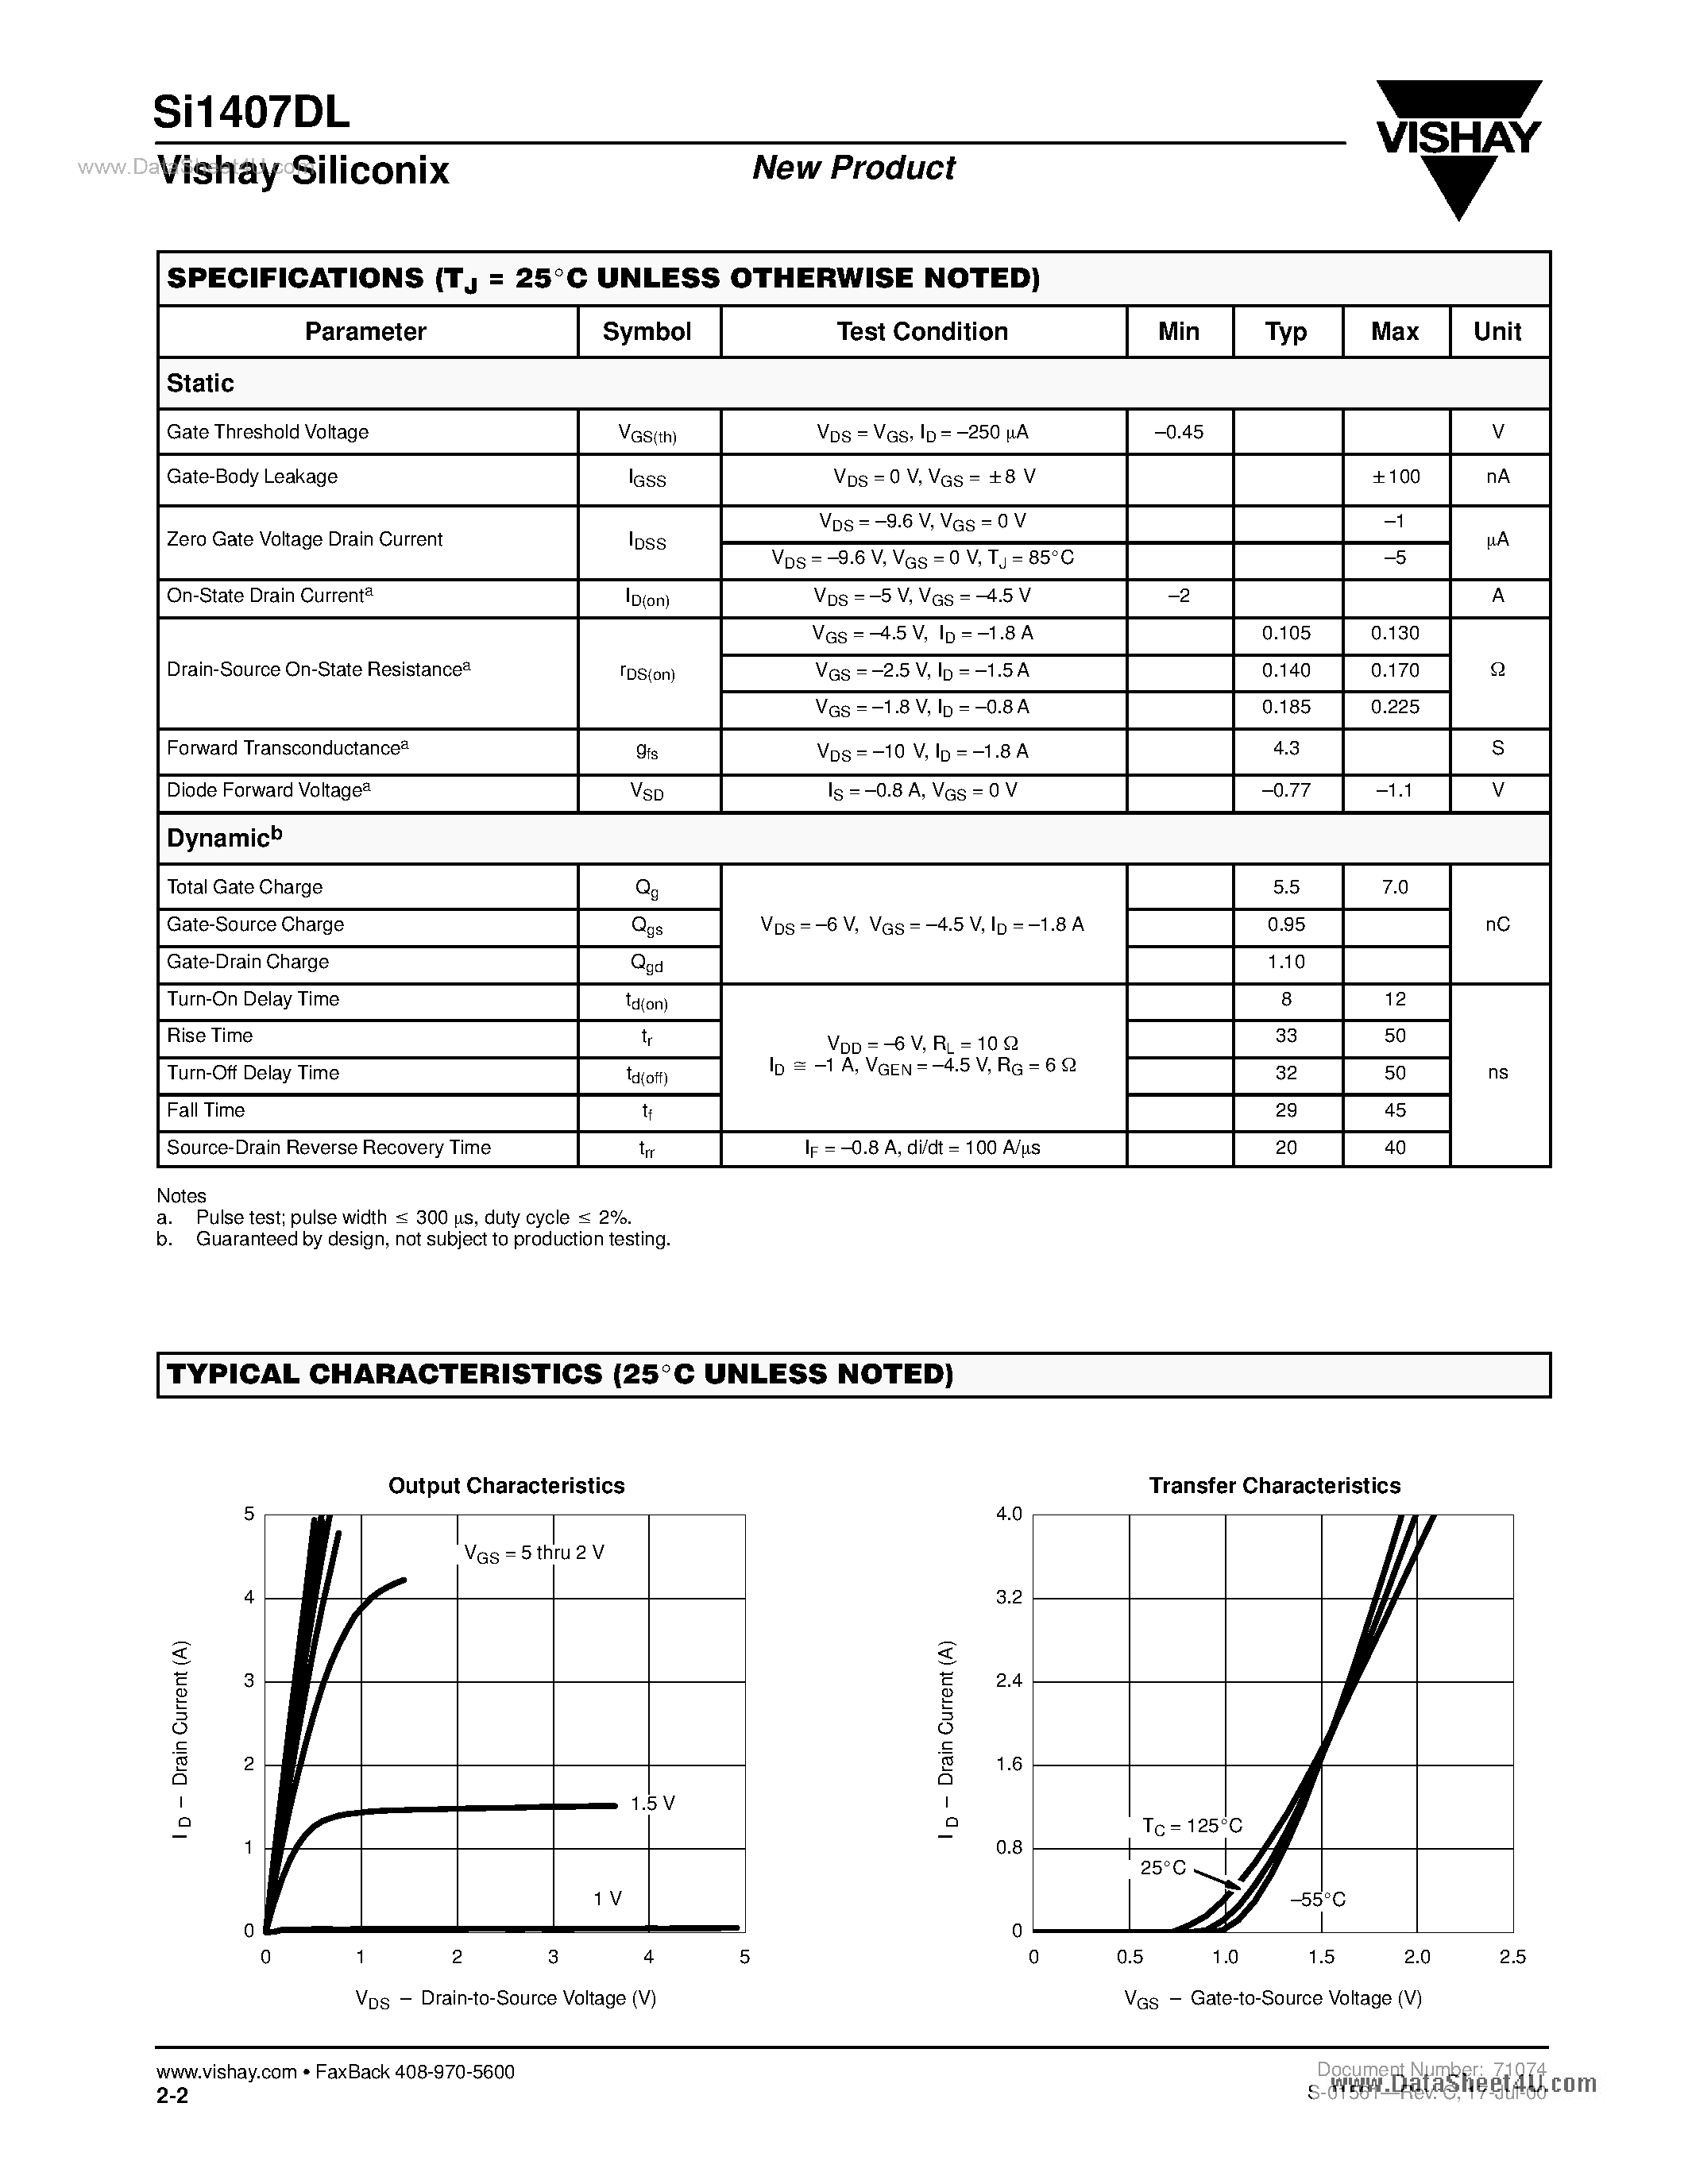 Datasheet SI1407DL - P-Channel 1.8-V (G-S) MOSFET page 2